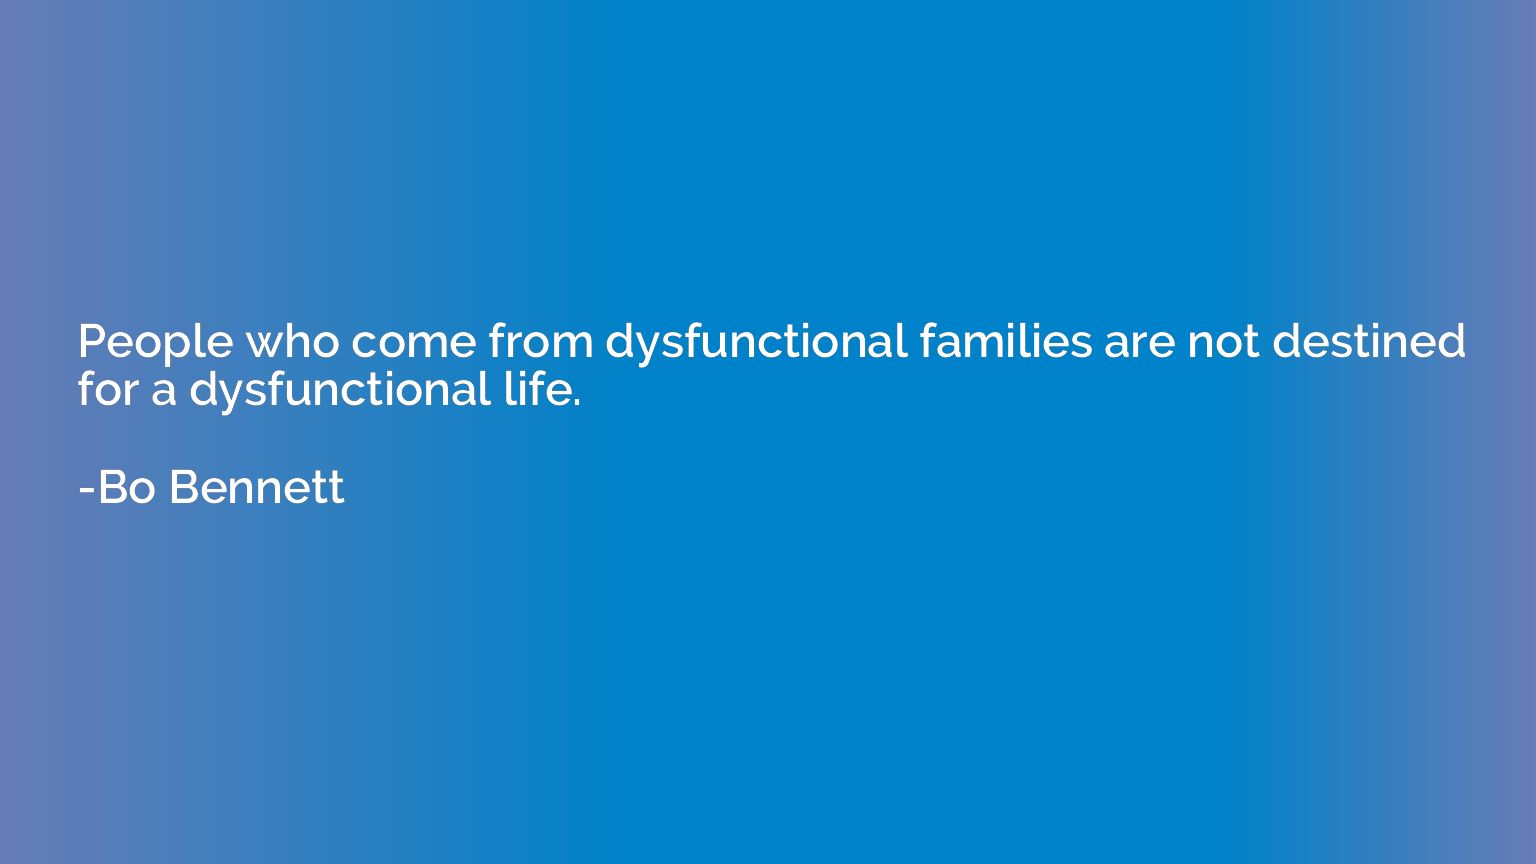 People who come from dysfunctional families are not destined